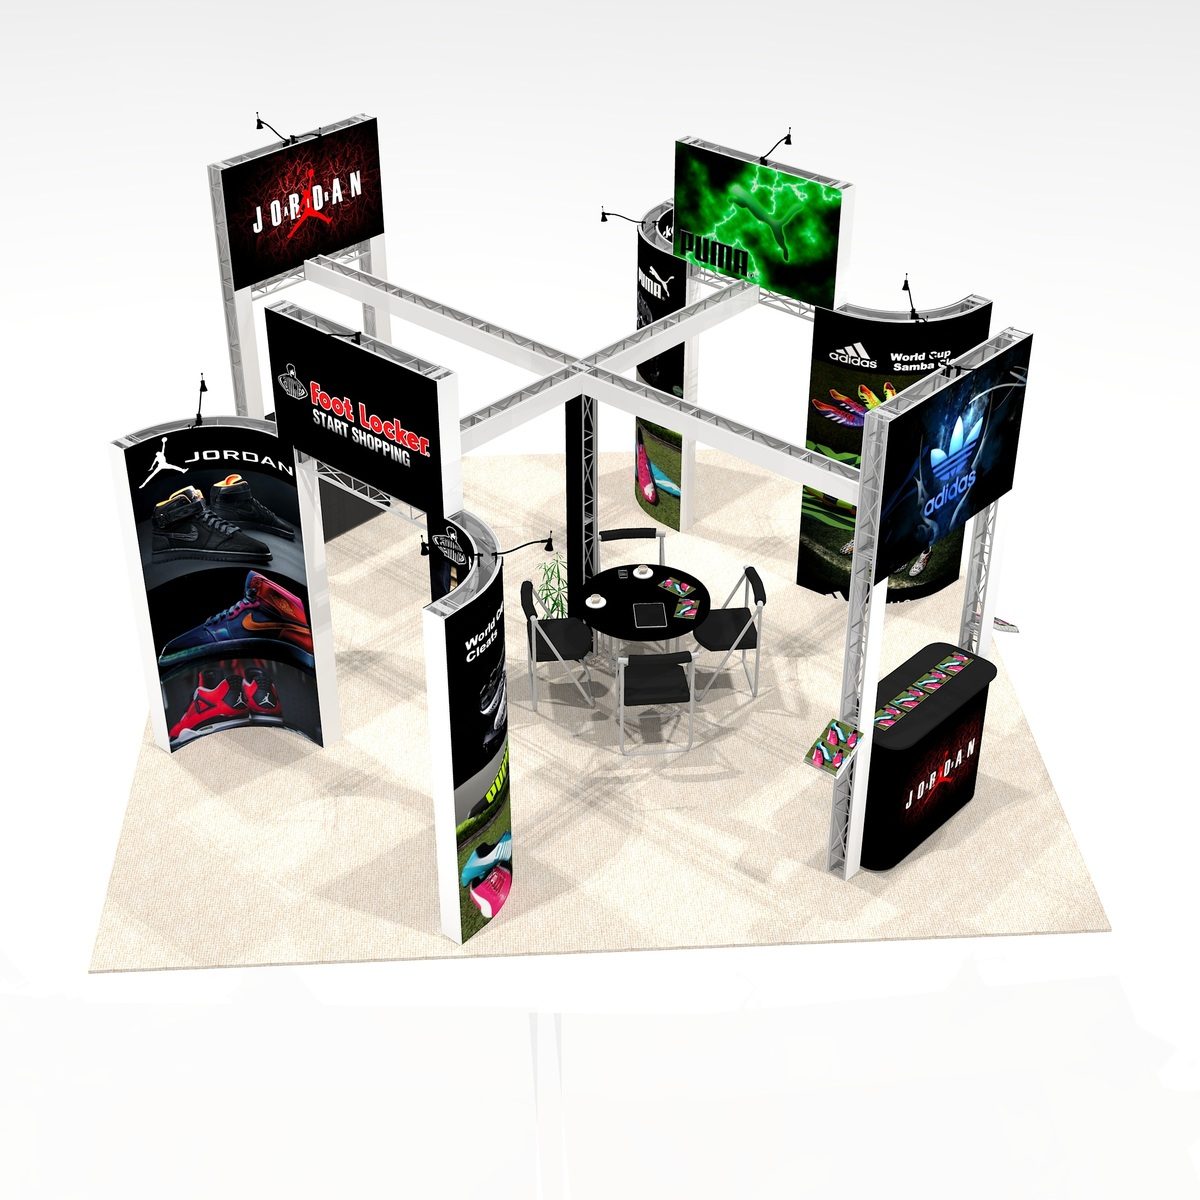 Island trade show exhibit design FRA2020 Graphic Package C